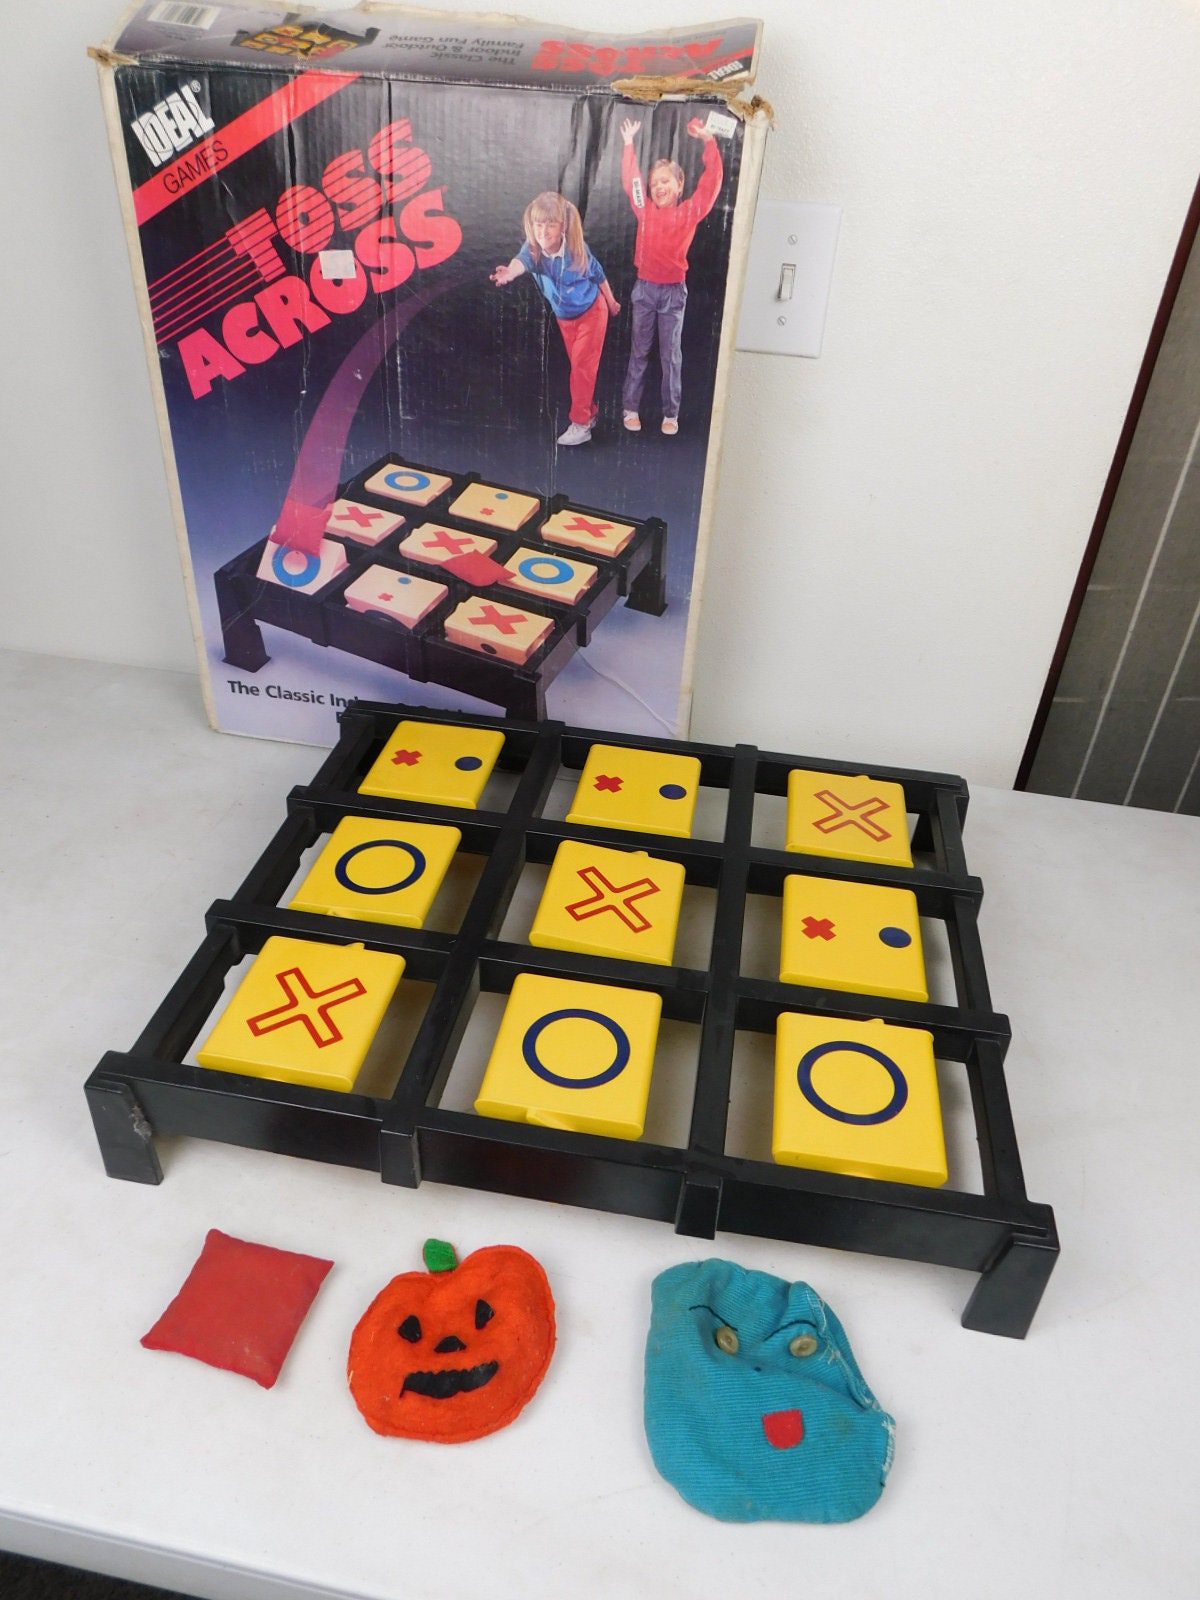 XOXO - Tic Tac Toe, Noughts and Crosses, Xs & Os Wooden Board Game (5x5), Shop Today. Get it Tomorrow!